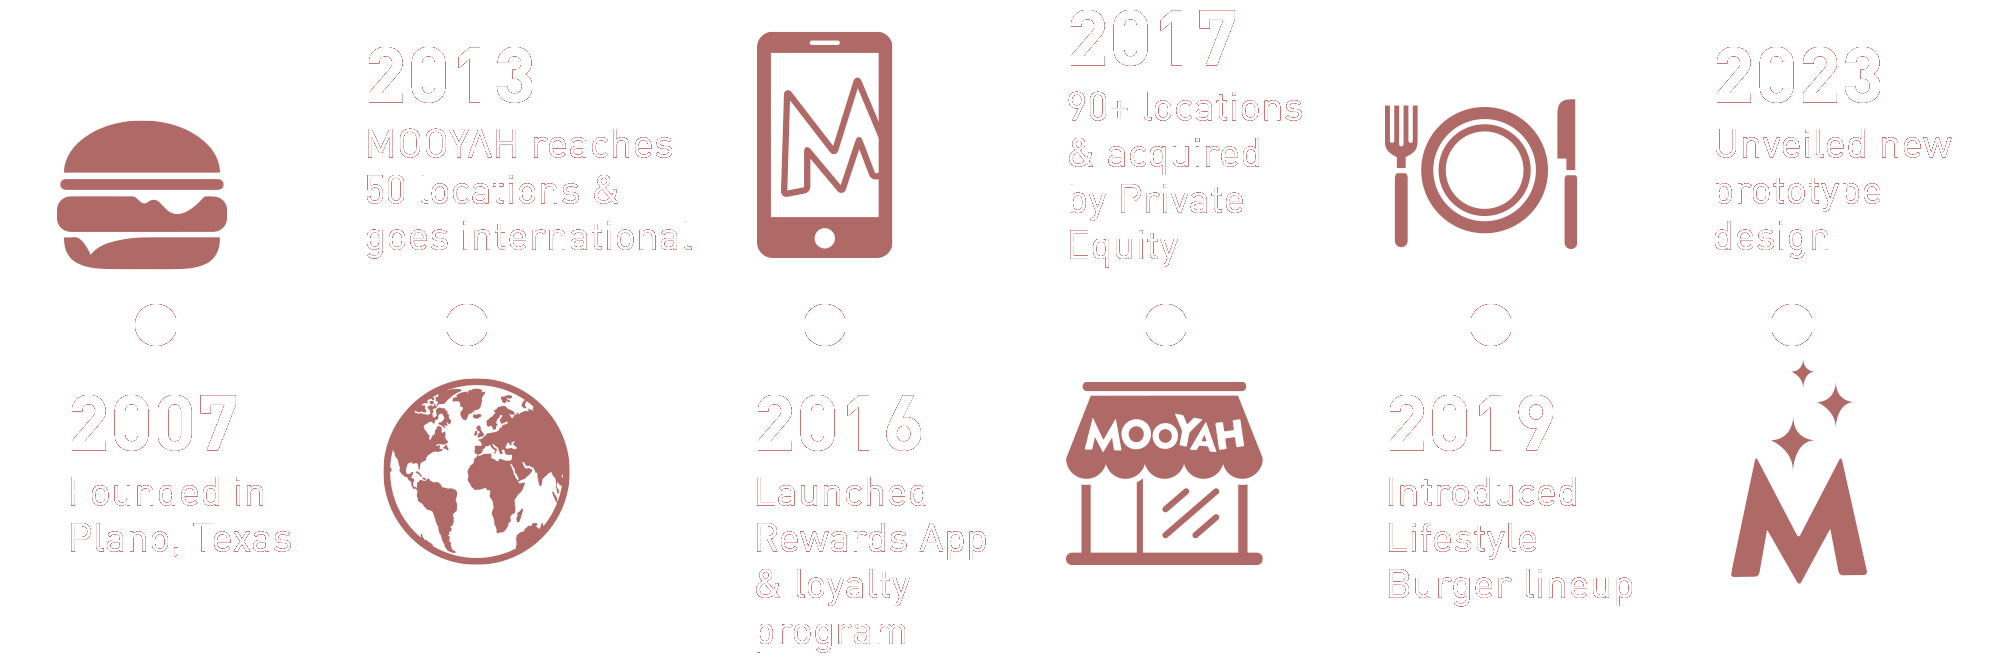 MOOYAH History Timeline: 2007 to 2023